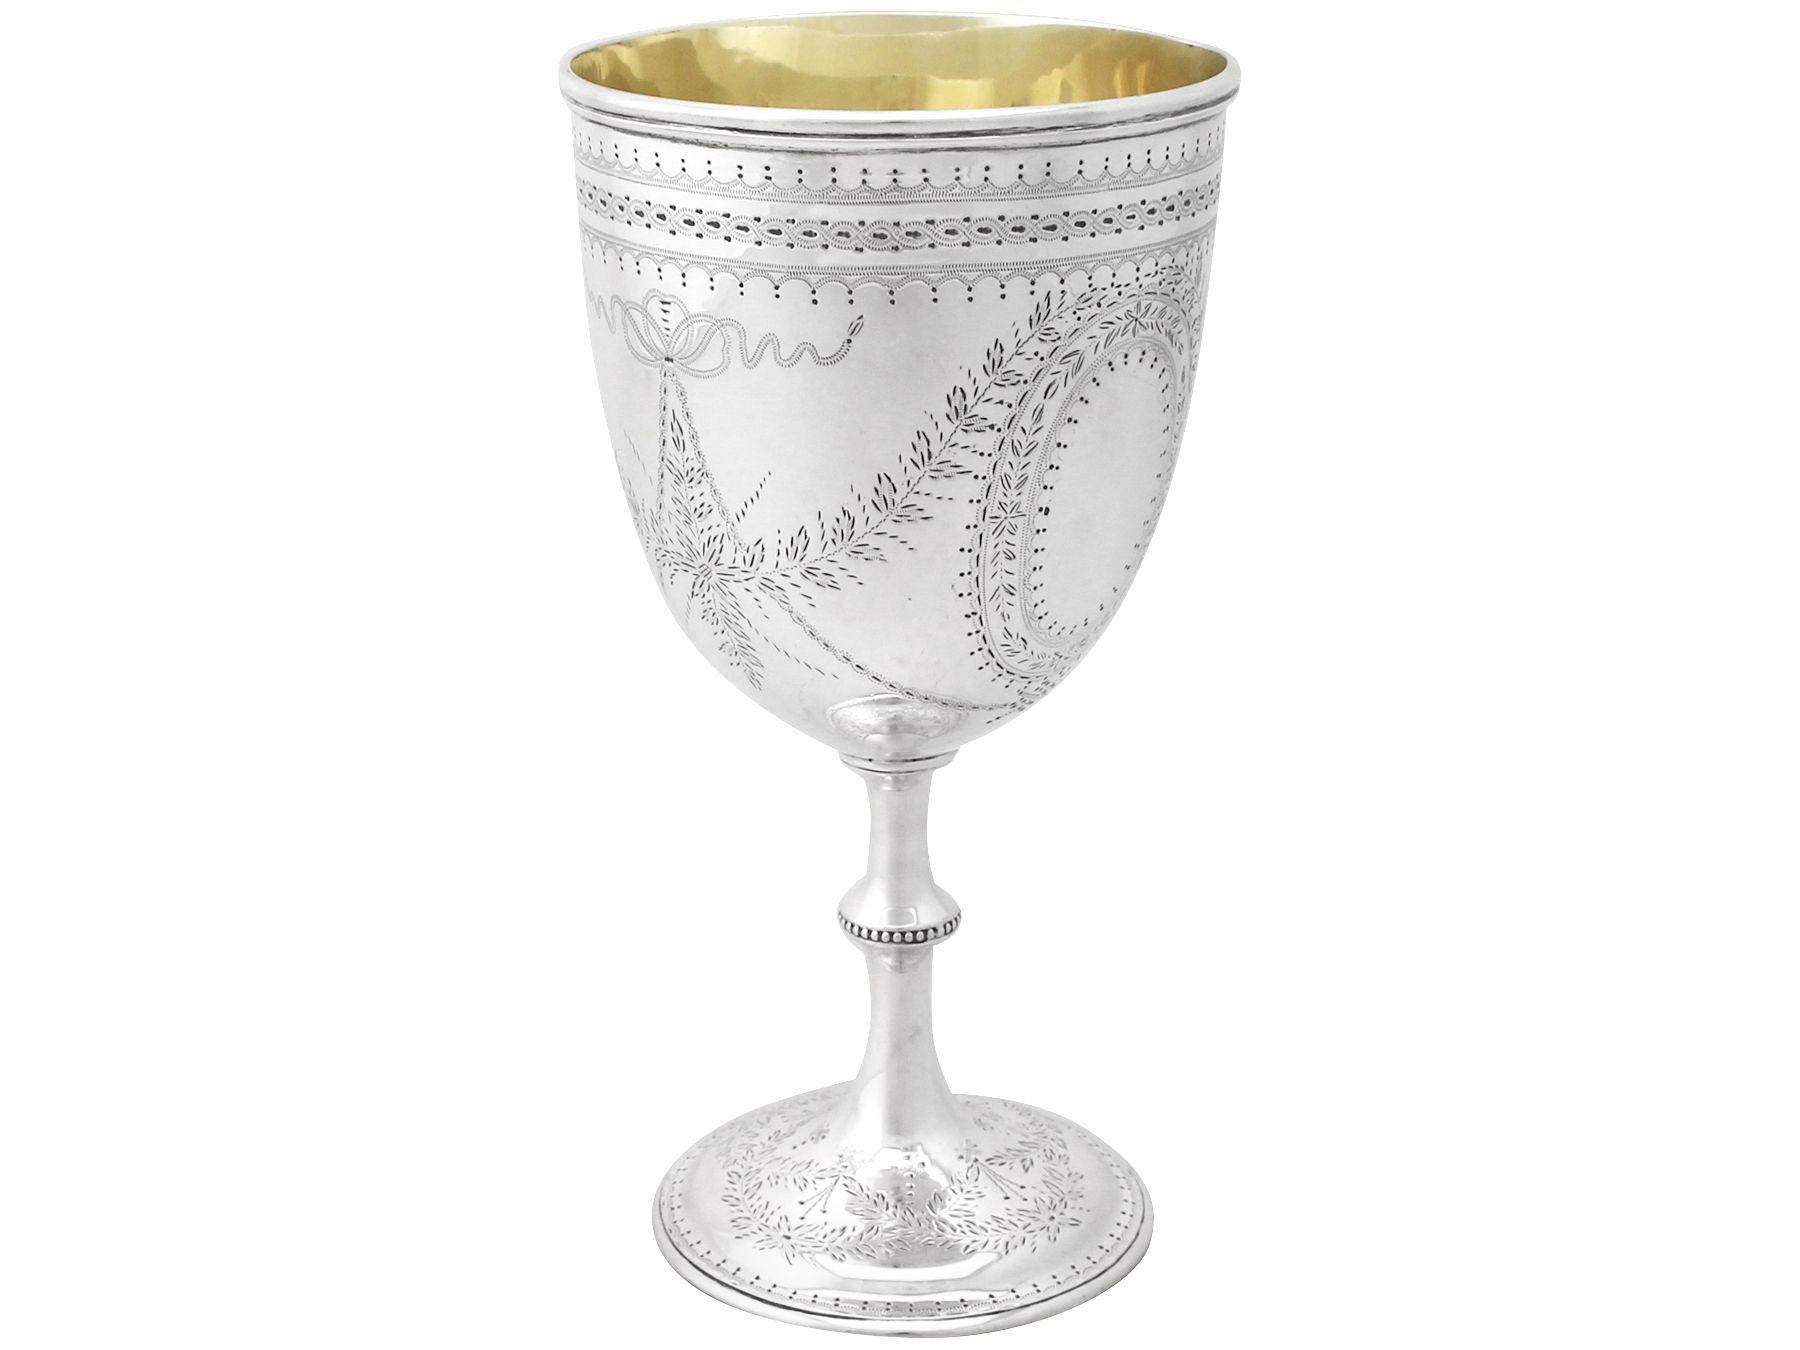 An exceptional, fine and impressive, large antique Victorian English sterling silver goblet; an addition to our collection of wine and drinks related silverware 

This exceptional antique Victorian sterling silver goblet has a circular bell shaped